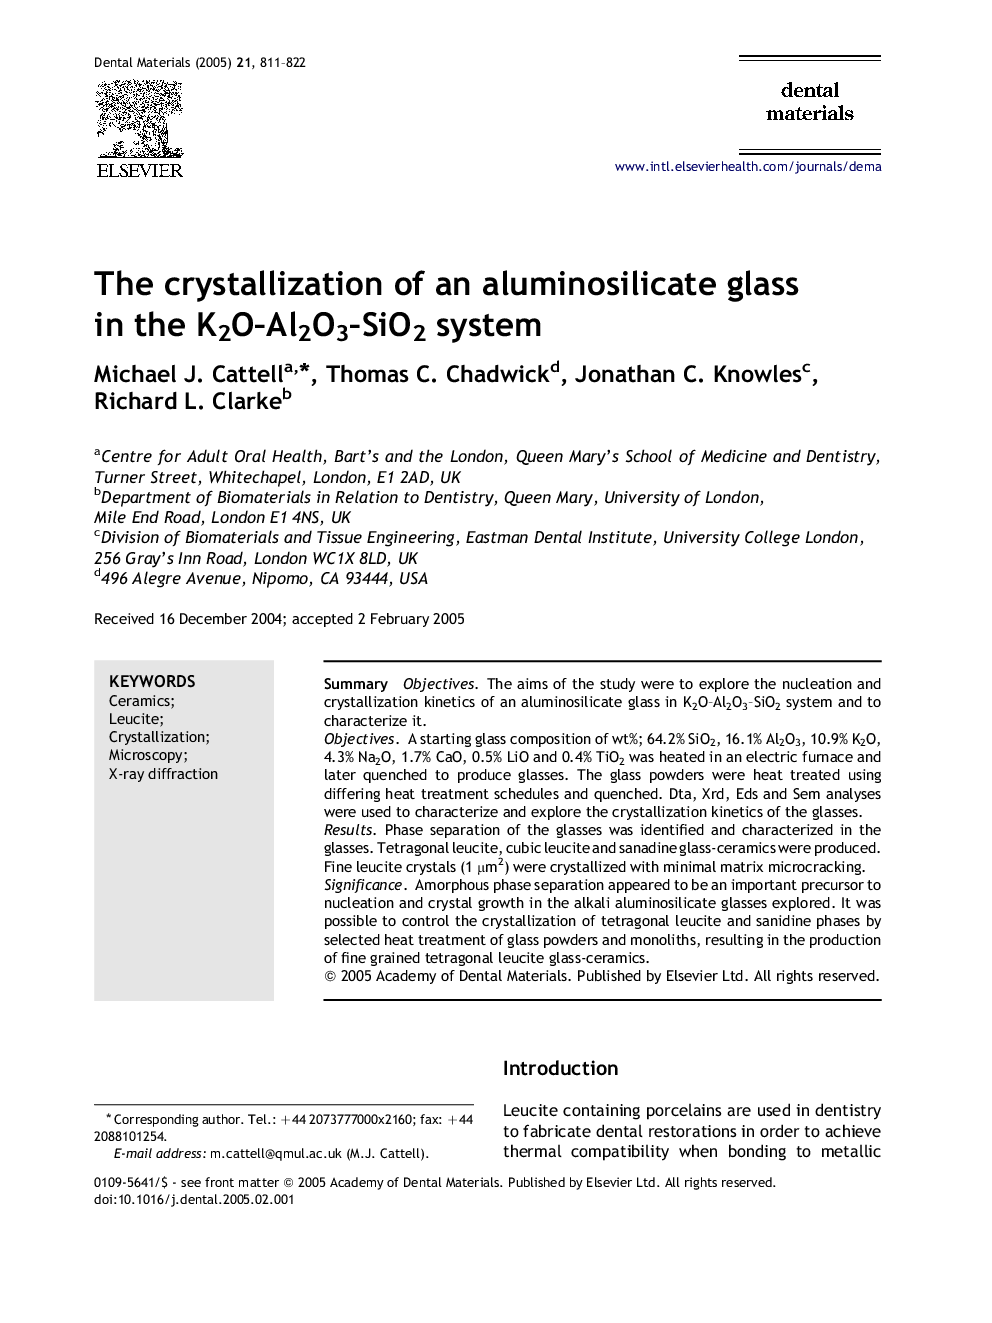 The crystallization of an aluminosilicate glass in the K2O-Al2O3-SiO2 system